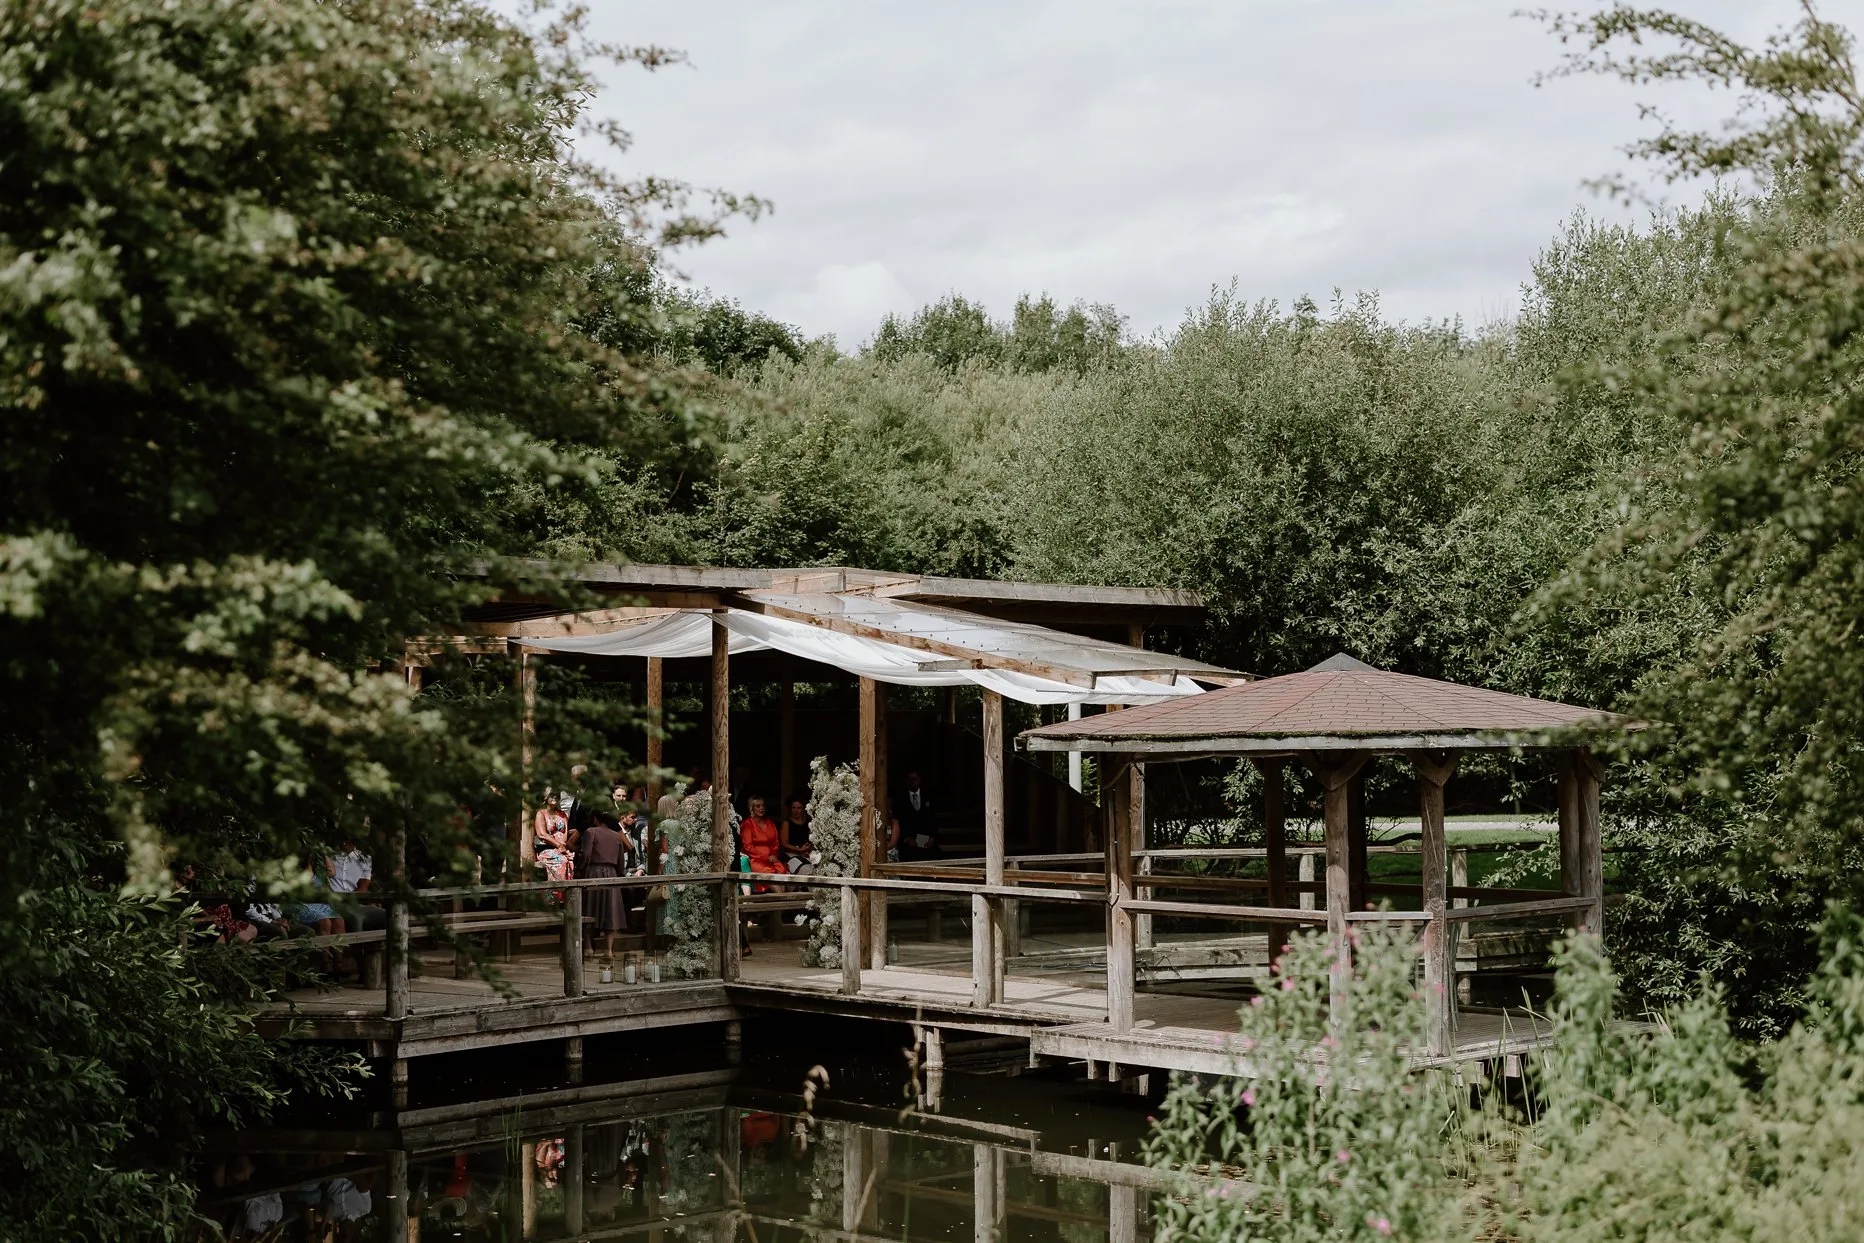 Exterior photograph of the pavilion at Oaklands Driffield. The ceremony area is located over the large lake and surrounded by trees.